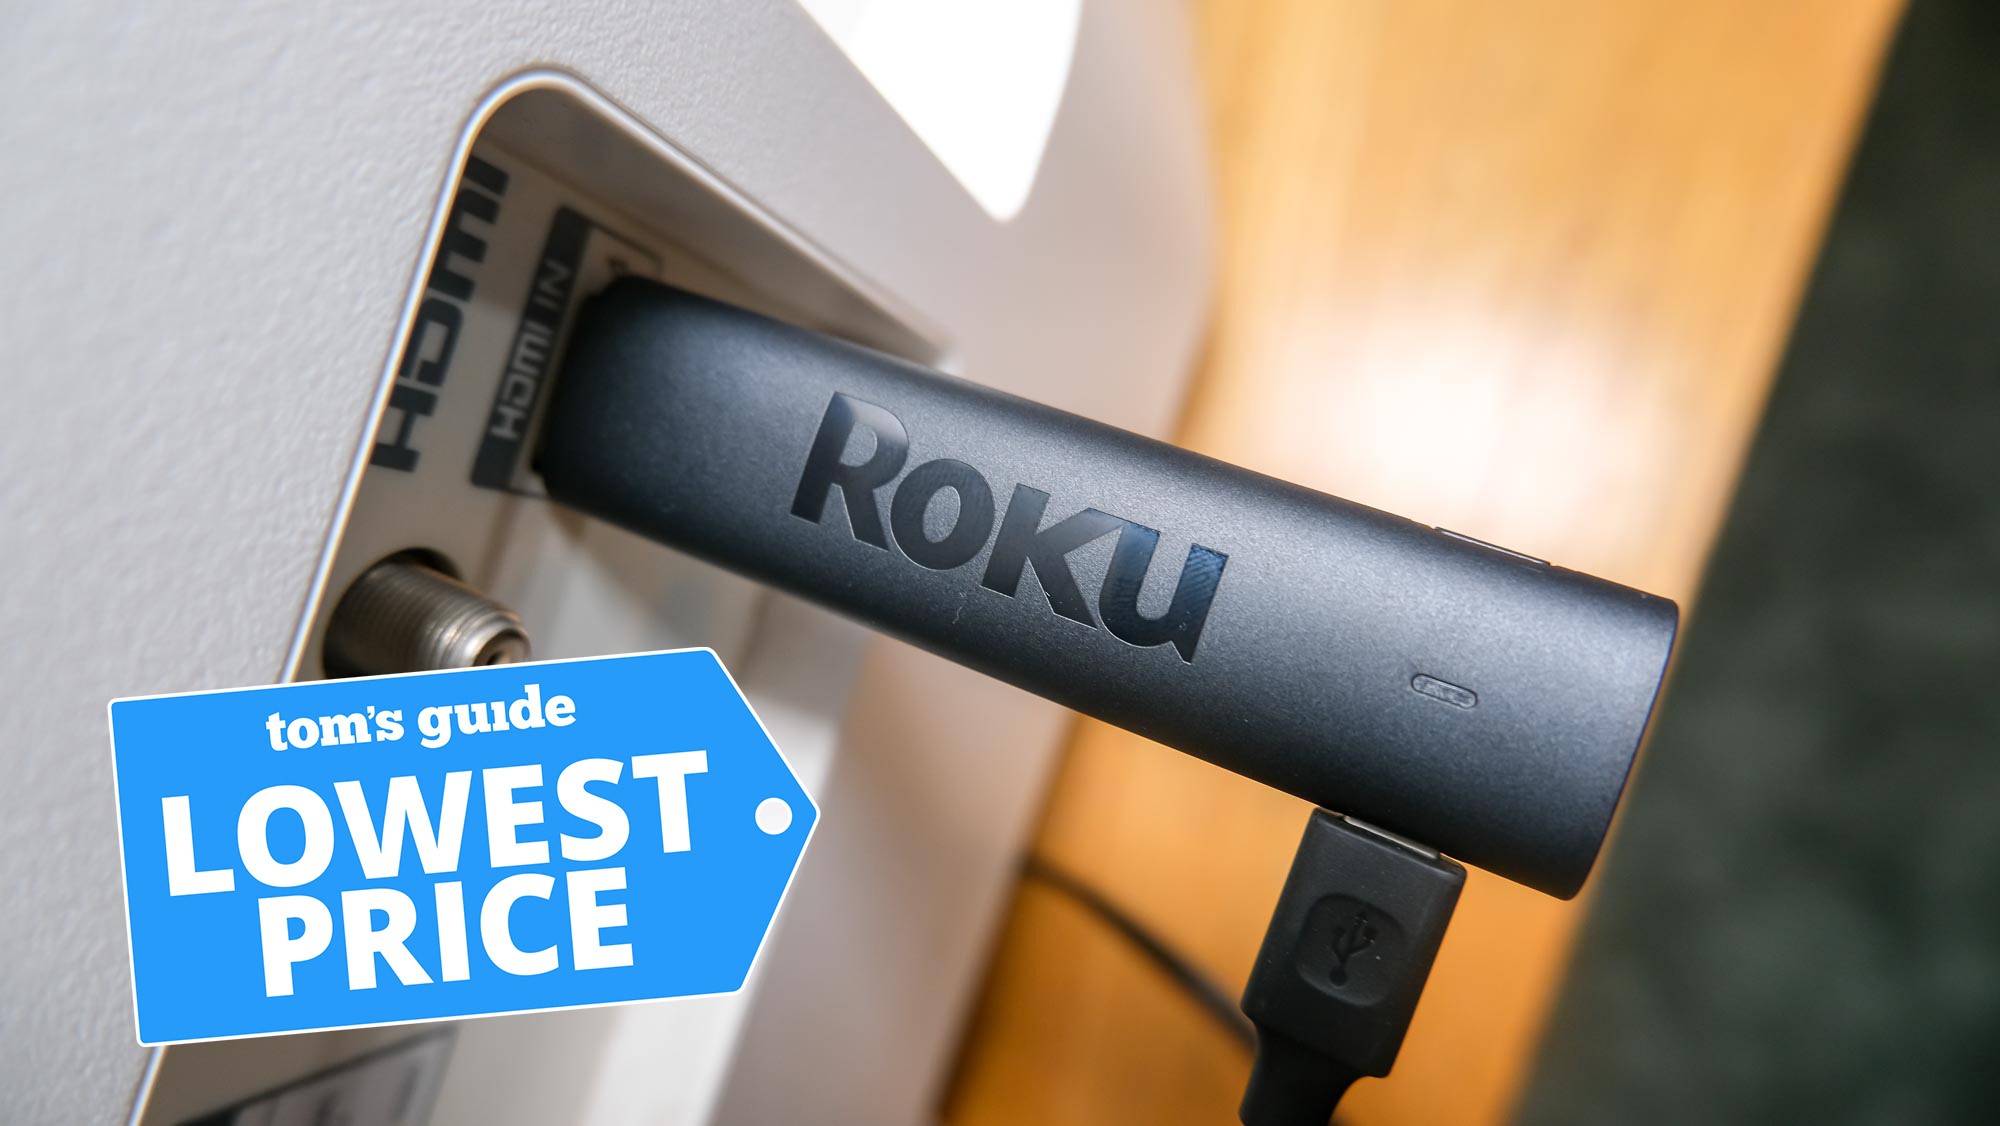 The Roku Streaming Stick 4K is plugged into an HDMI port with Tom's Guide to the low-cost graphic above.